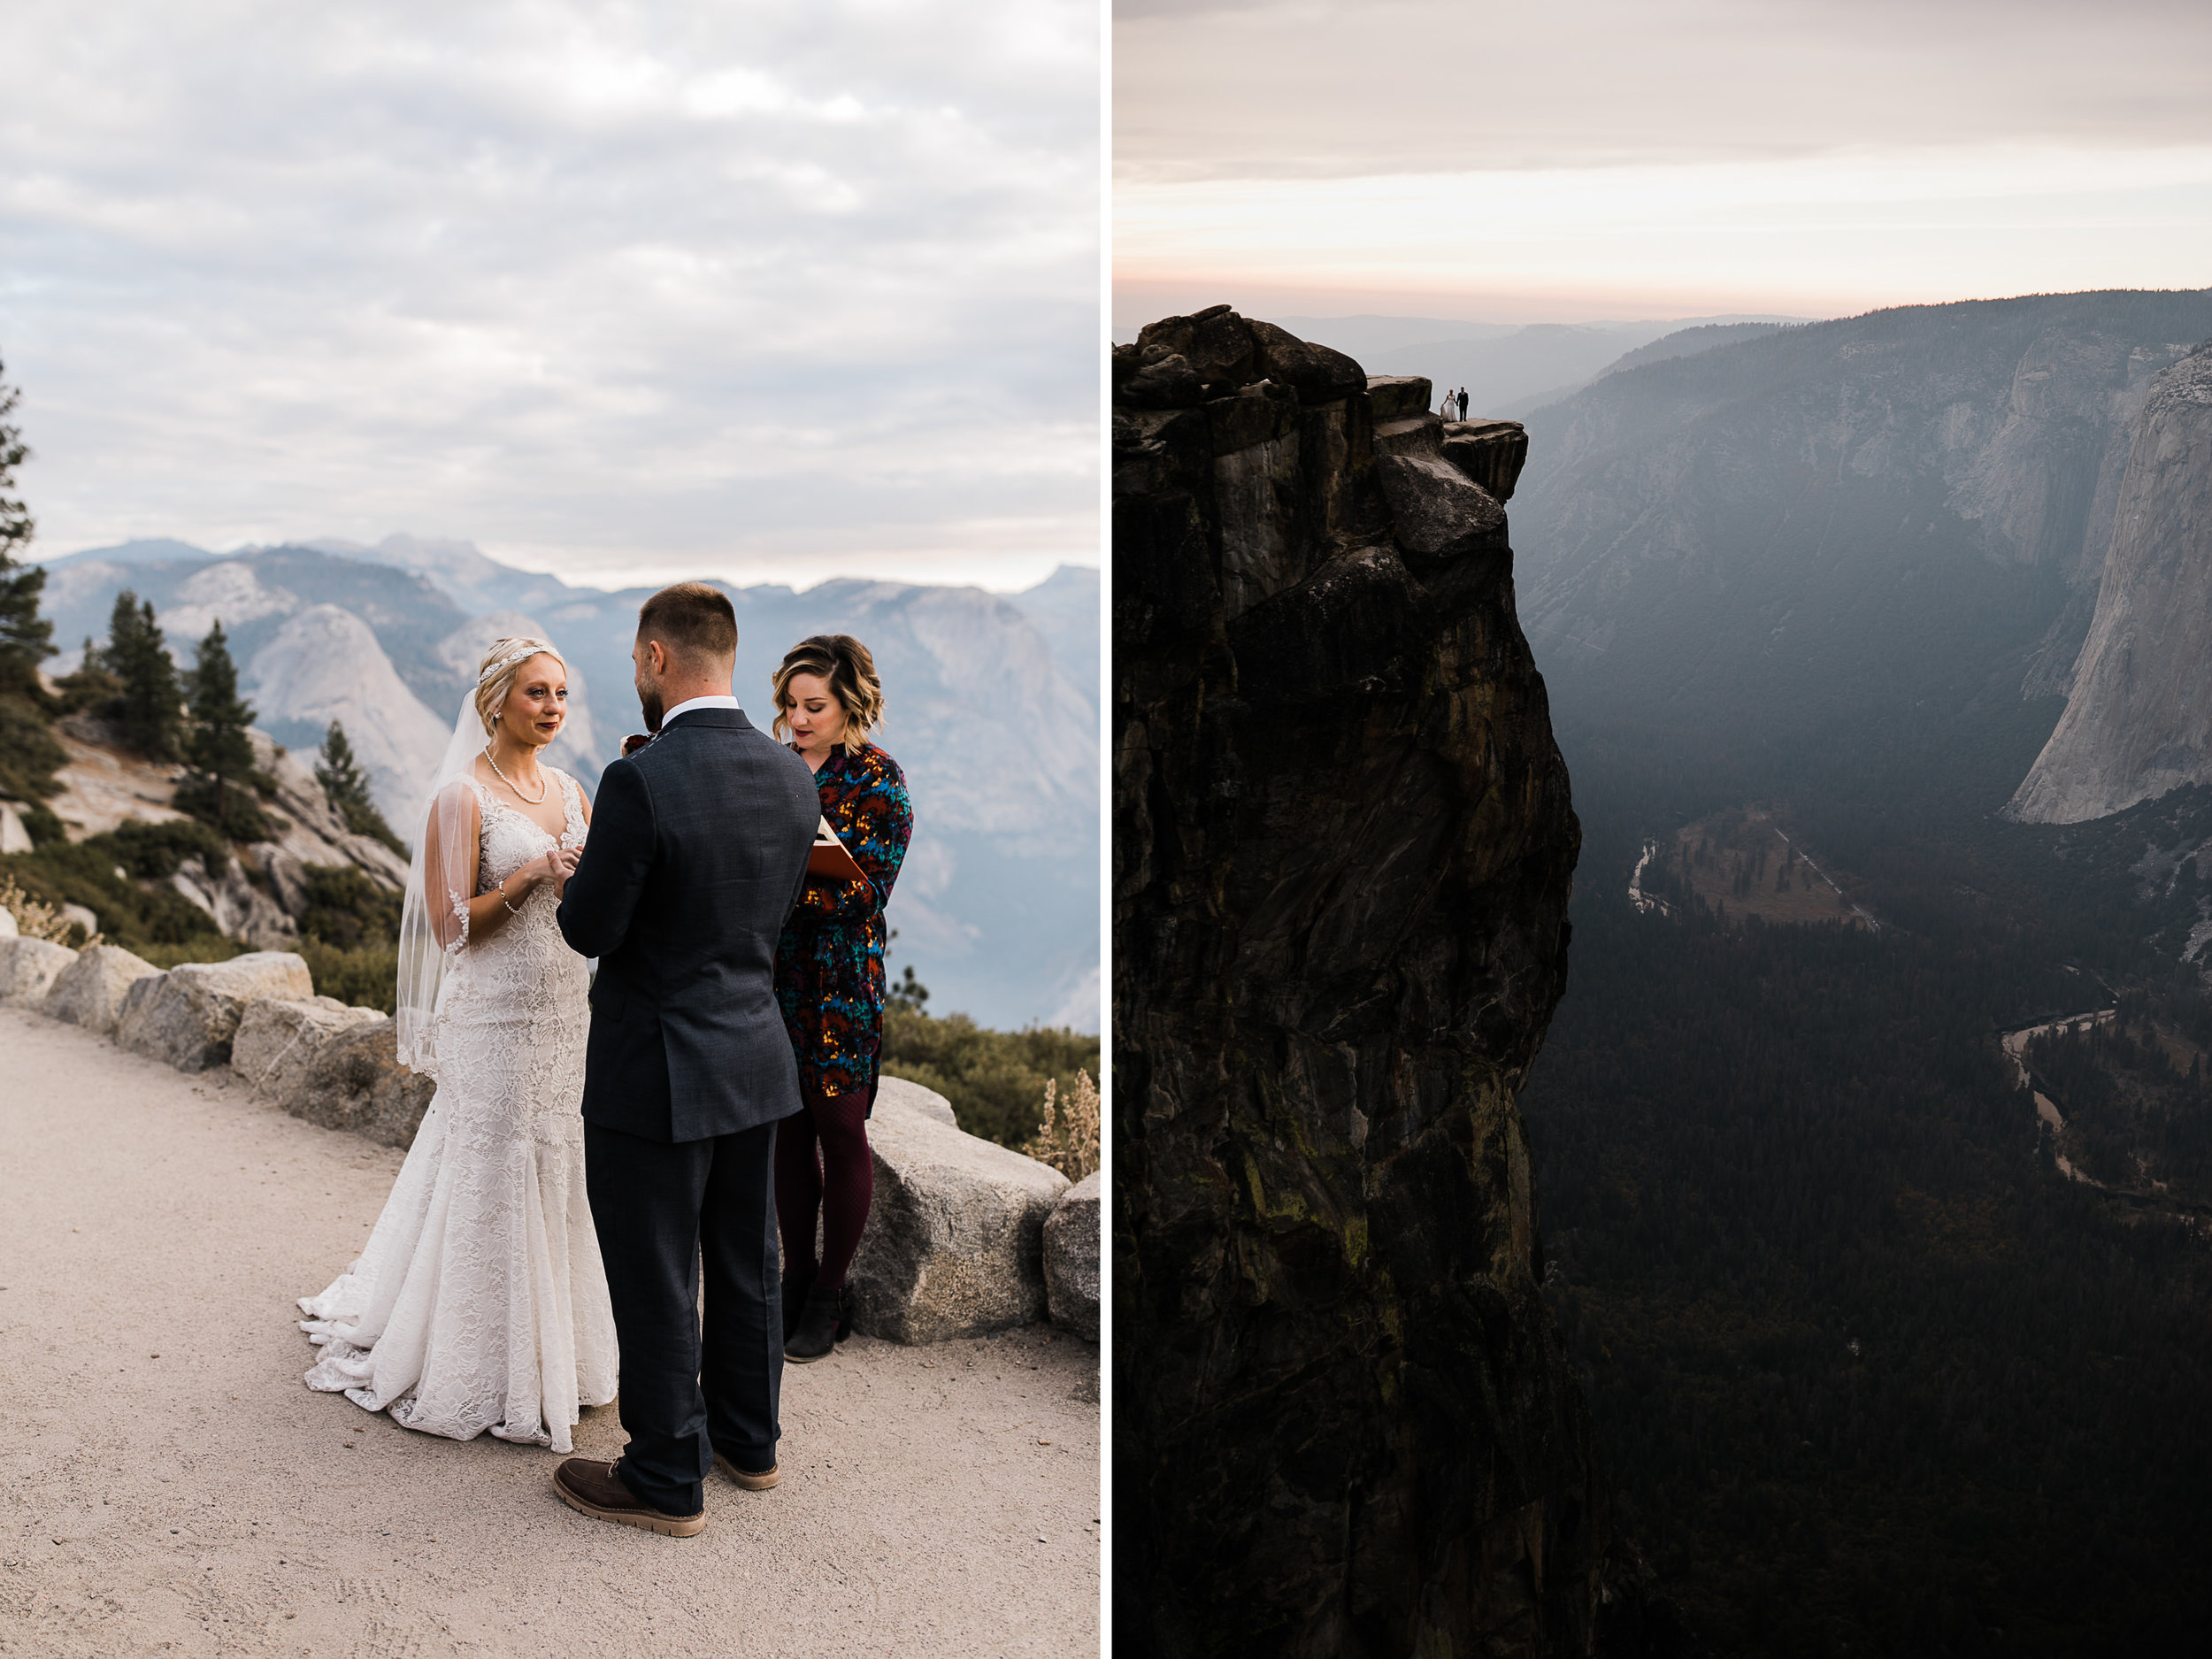 intimate wedding at glacier point | yosemite national park | destination wedding photographer | the hearnes adventure photography | www.thehearnes.com